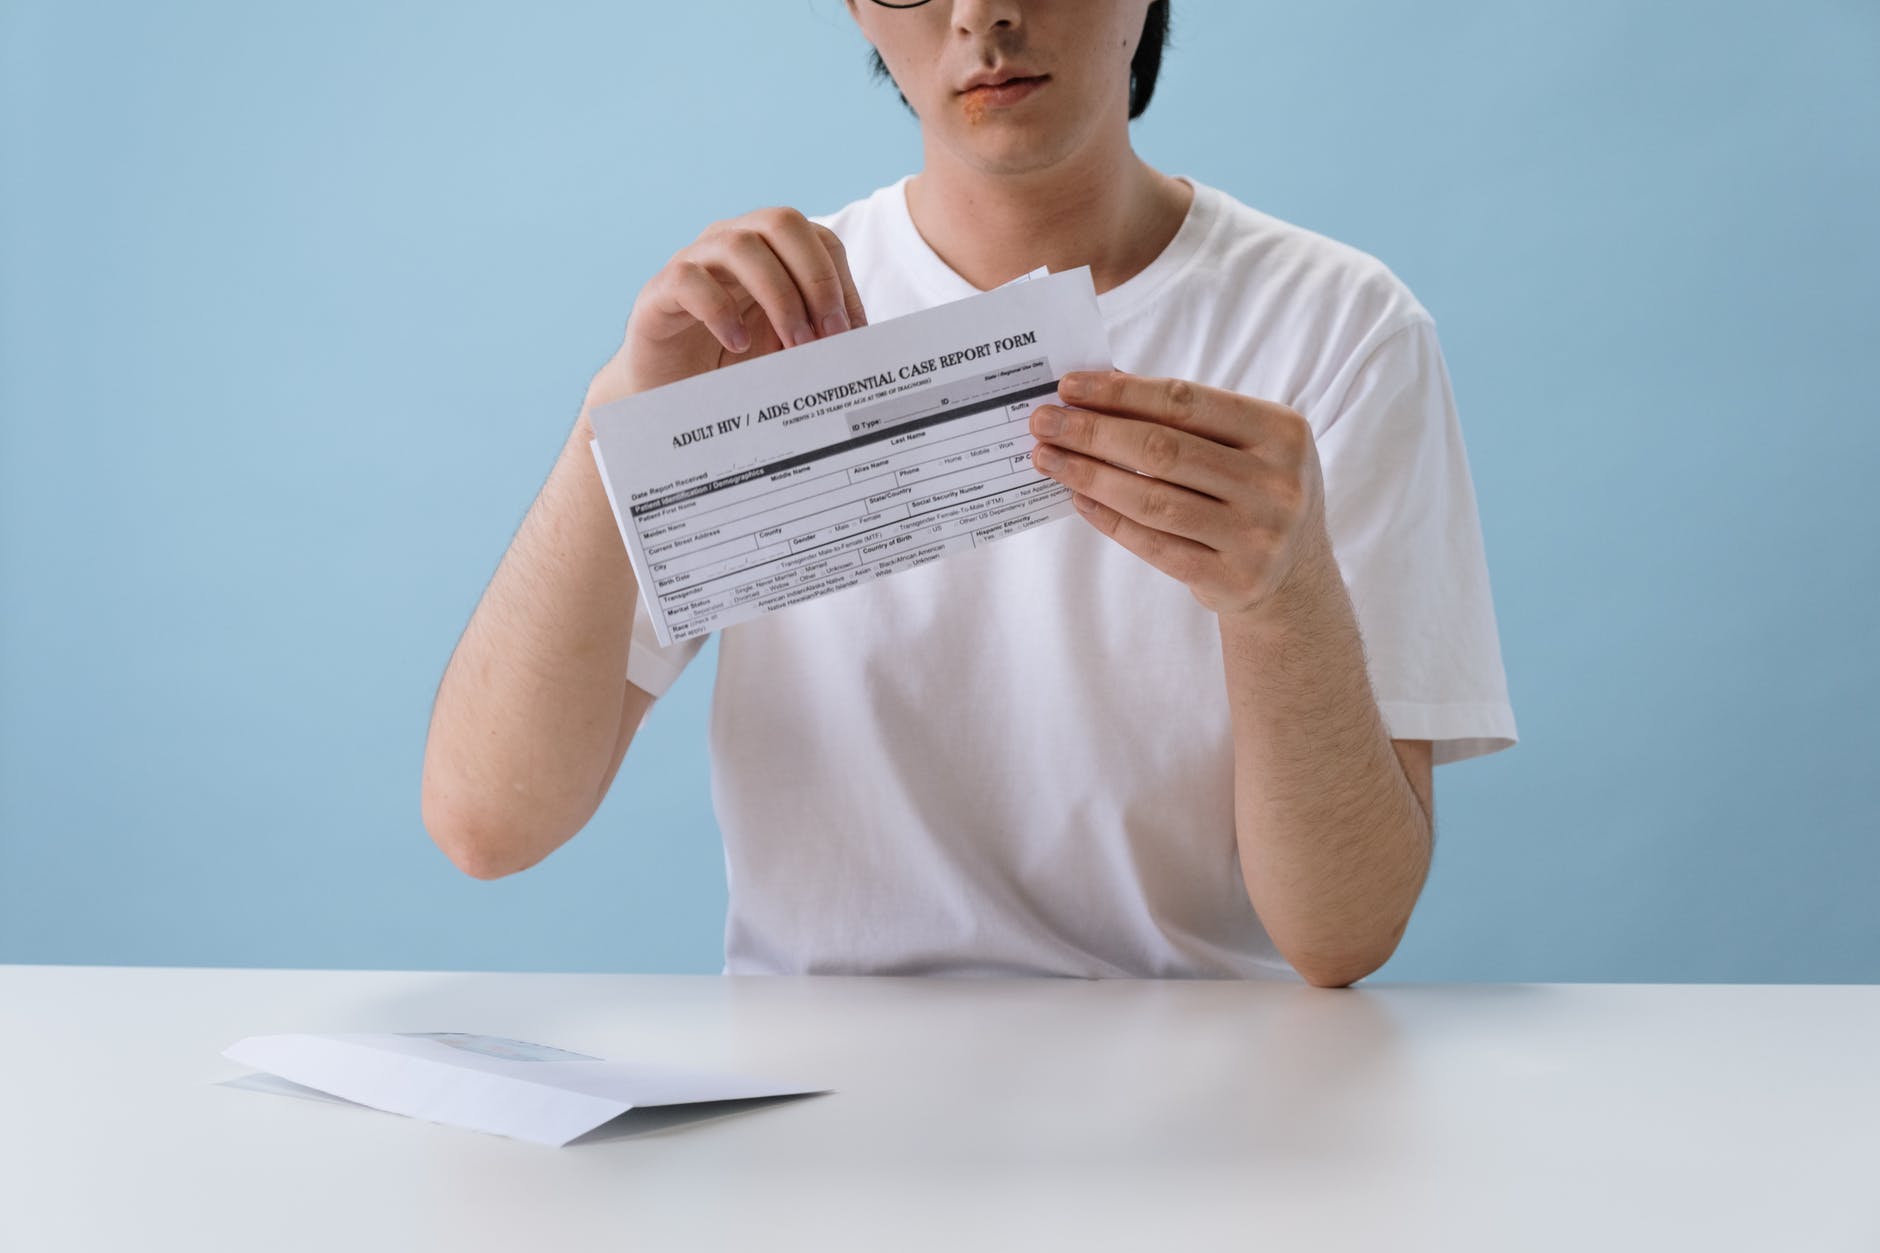 man in white t shirt holding hiv aids paper form